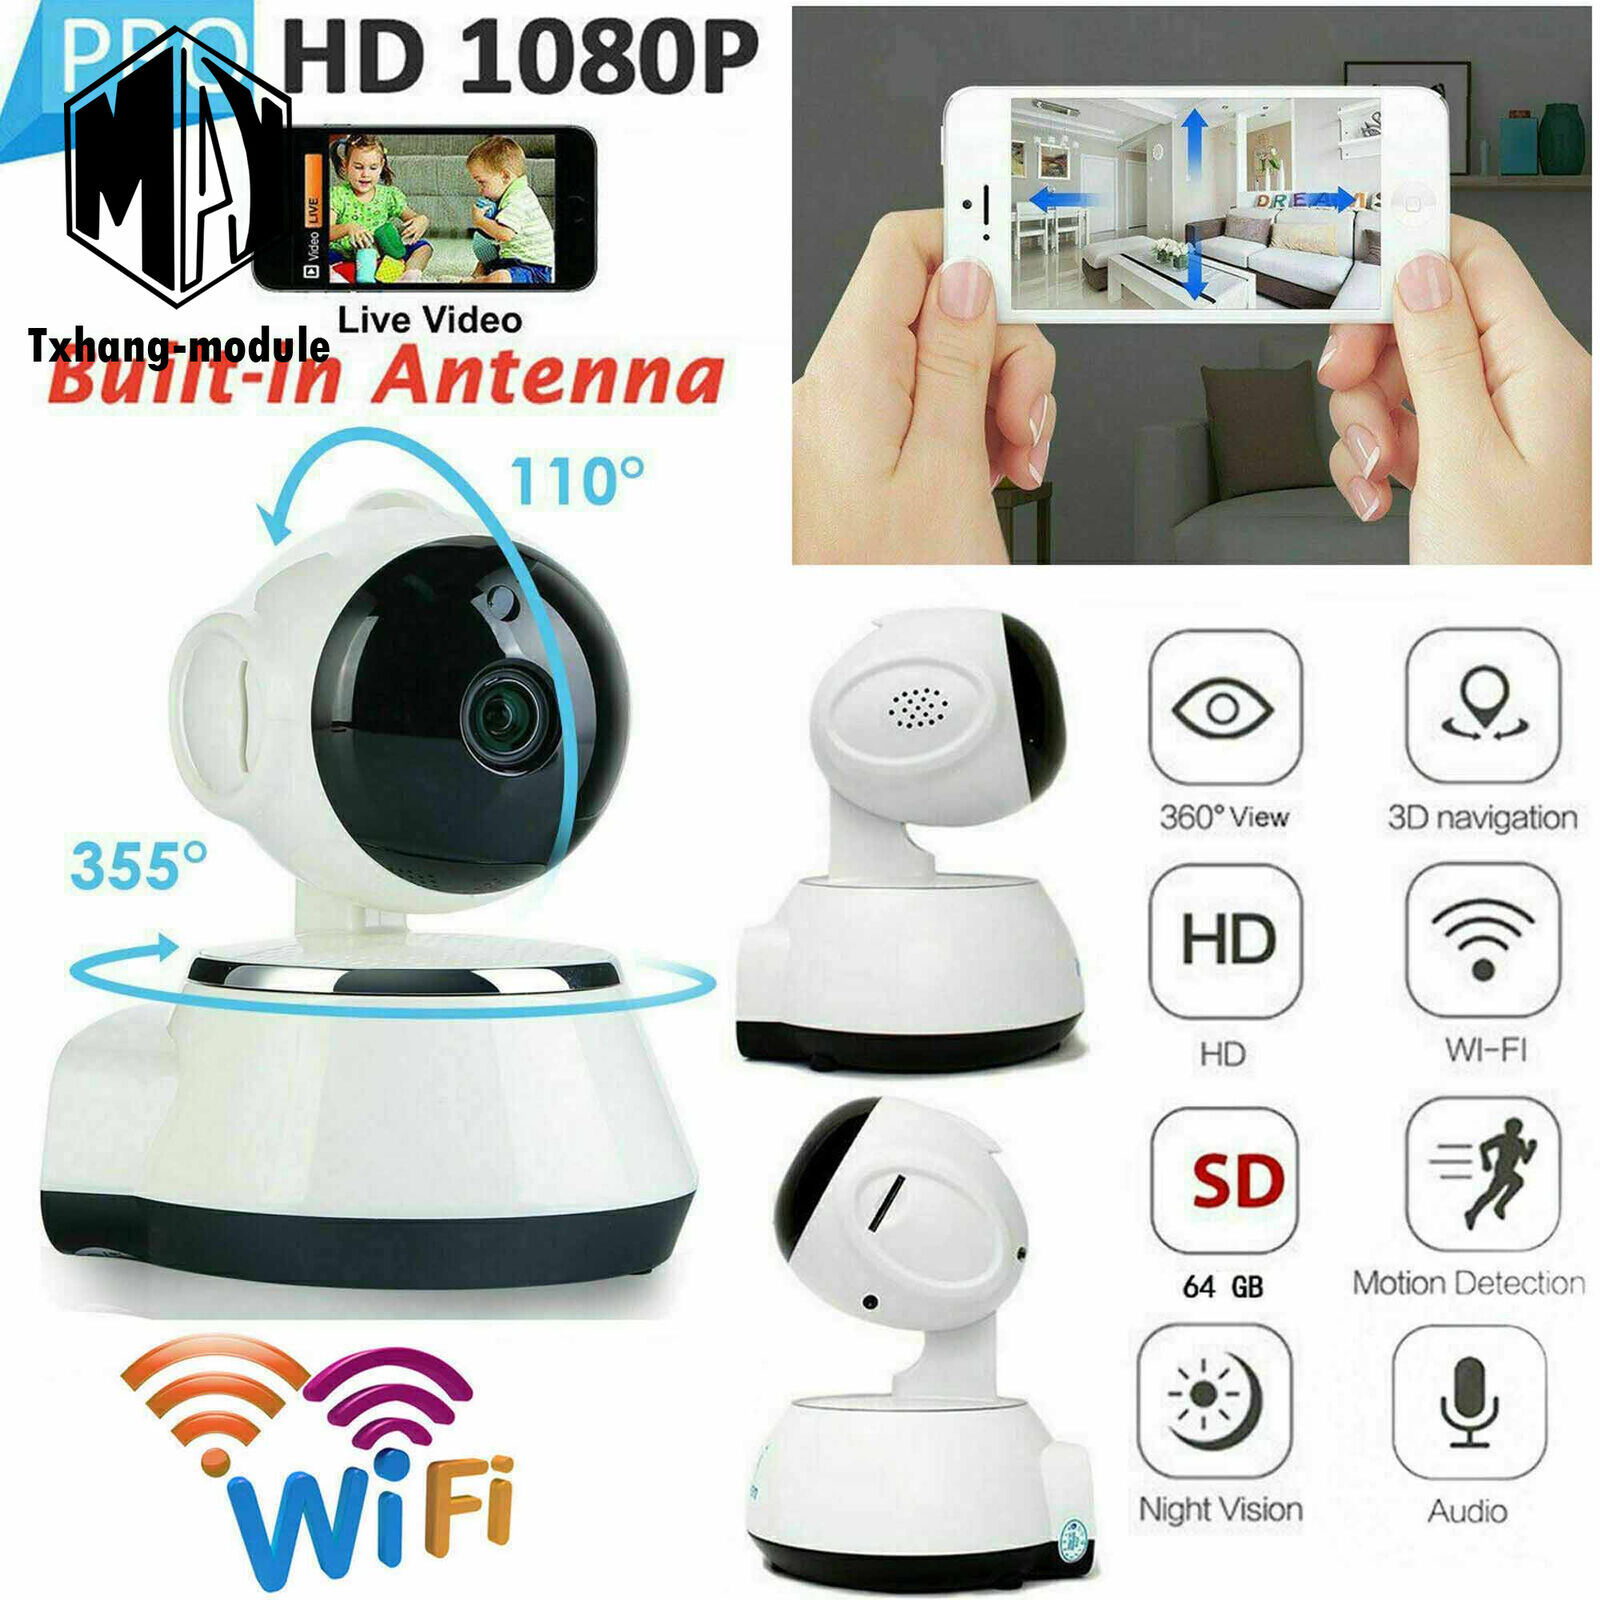 HD 1080P Wireless Camera IP Security Wifi Indoor CCTV Home Smart Monitor A2TM